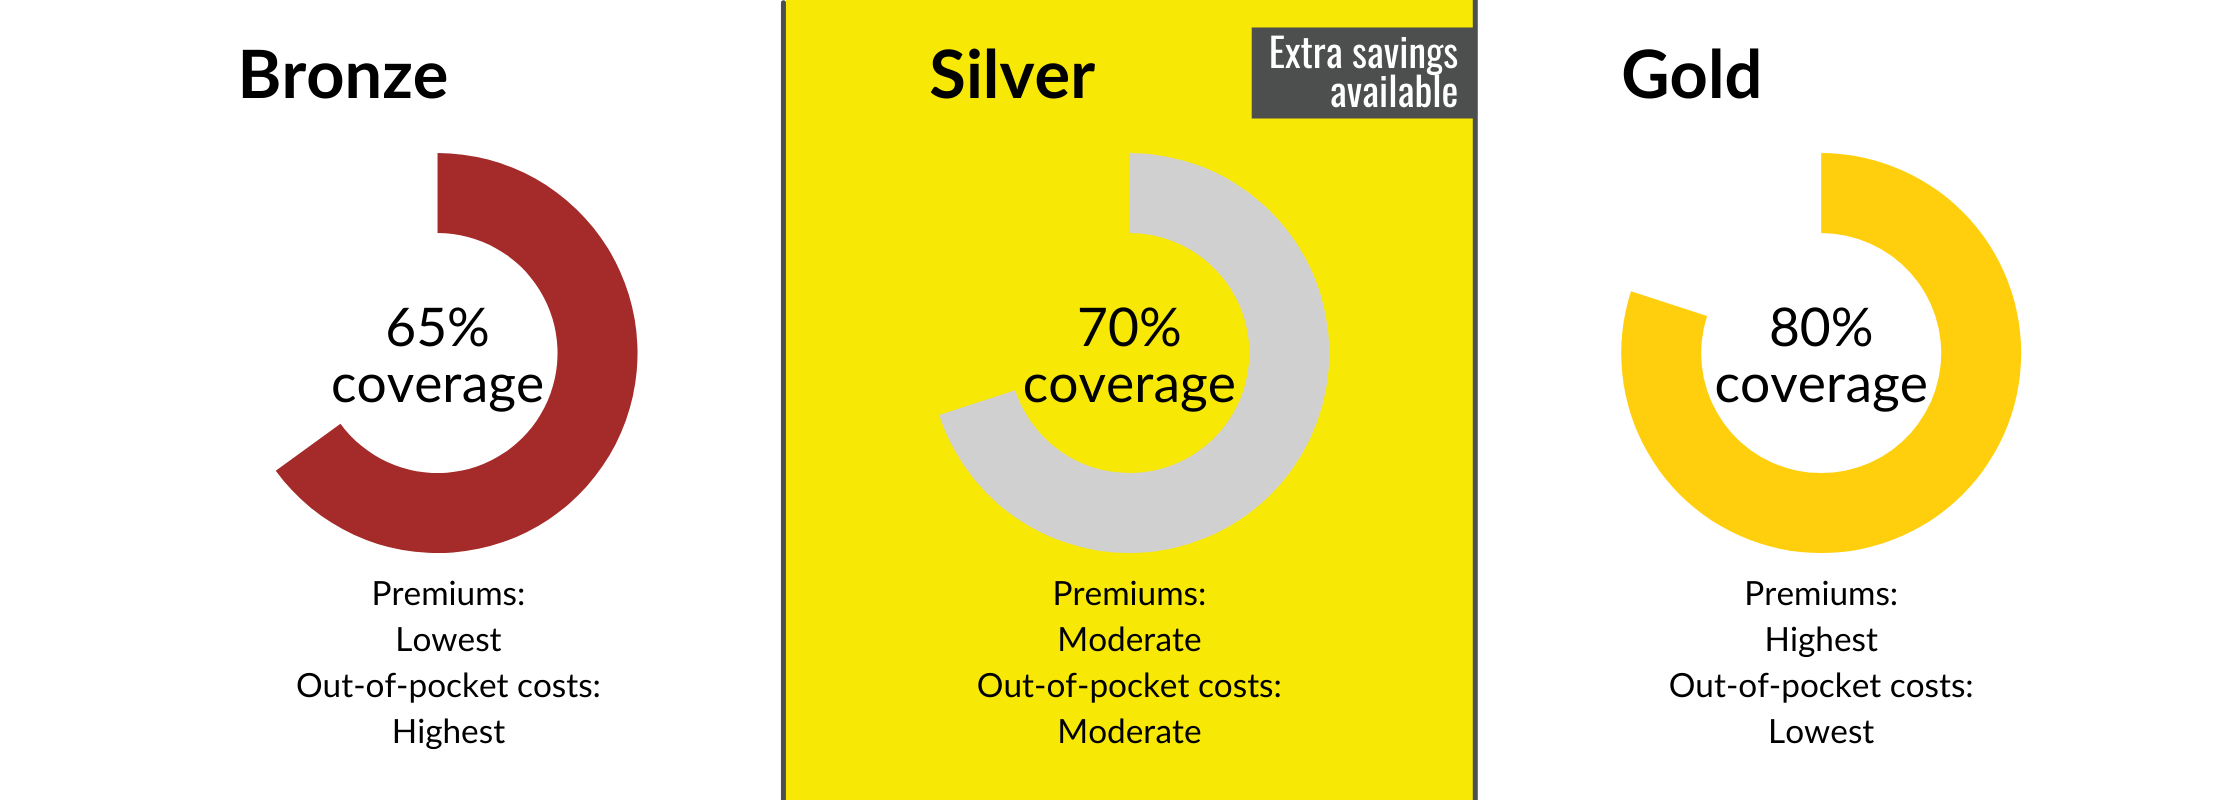 private-health-insurance-reforms-gold-silver-bronze-basic-product